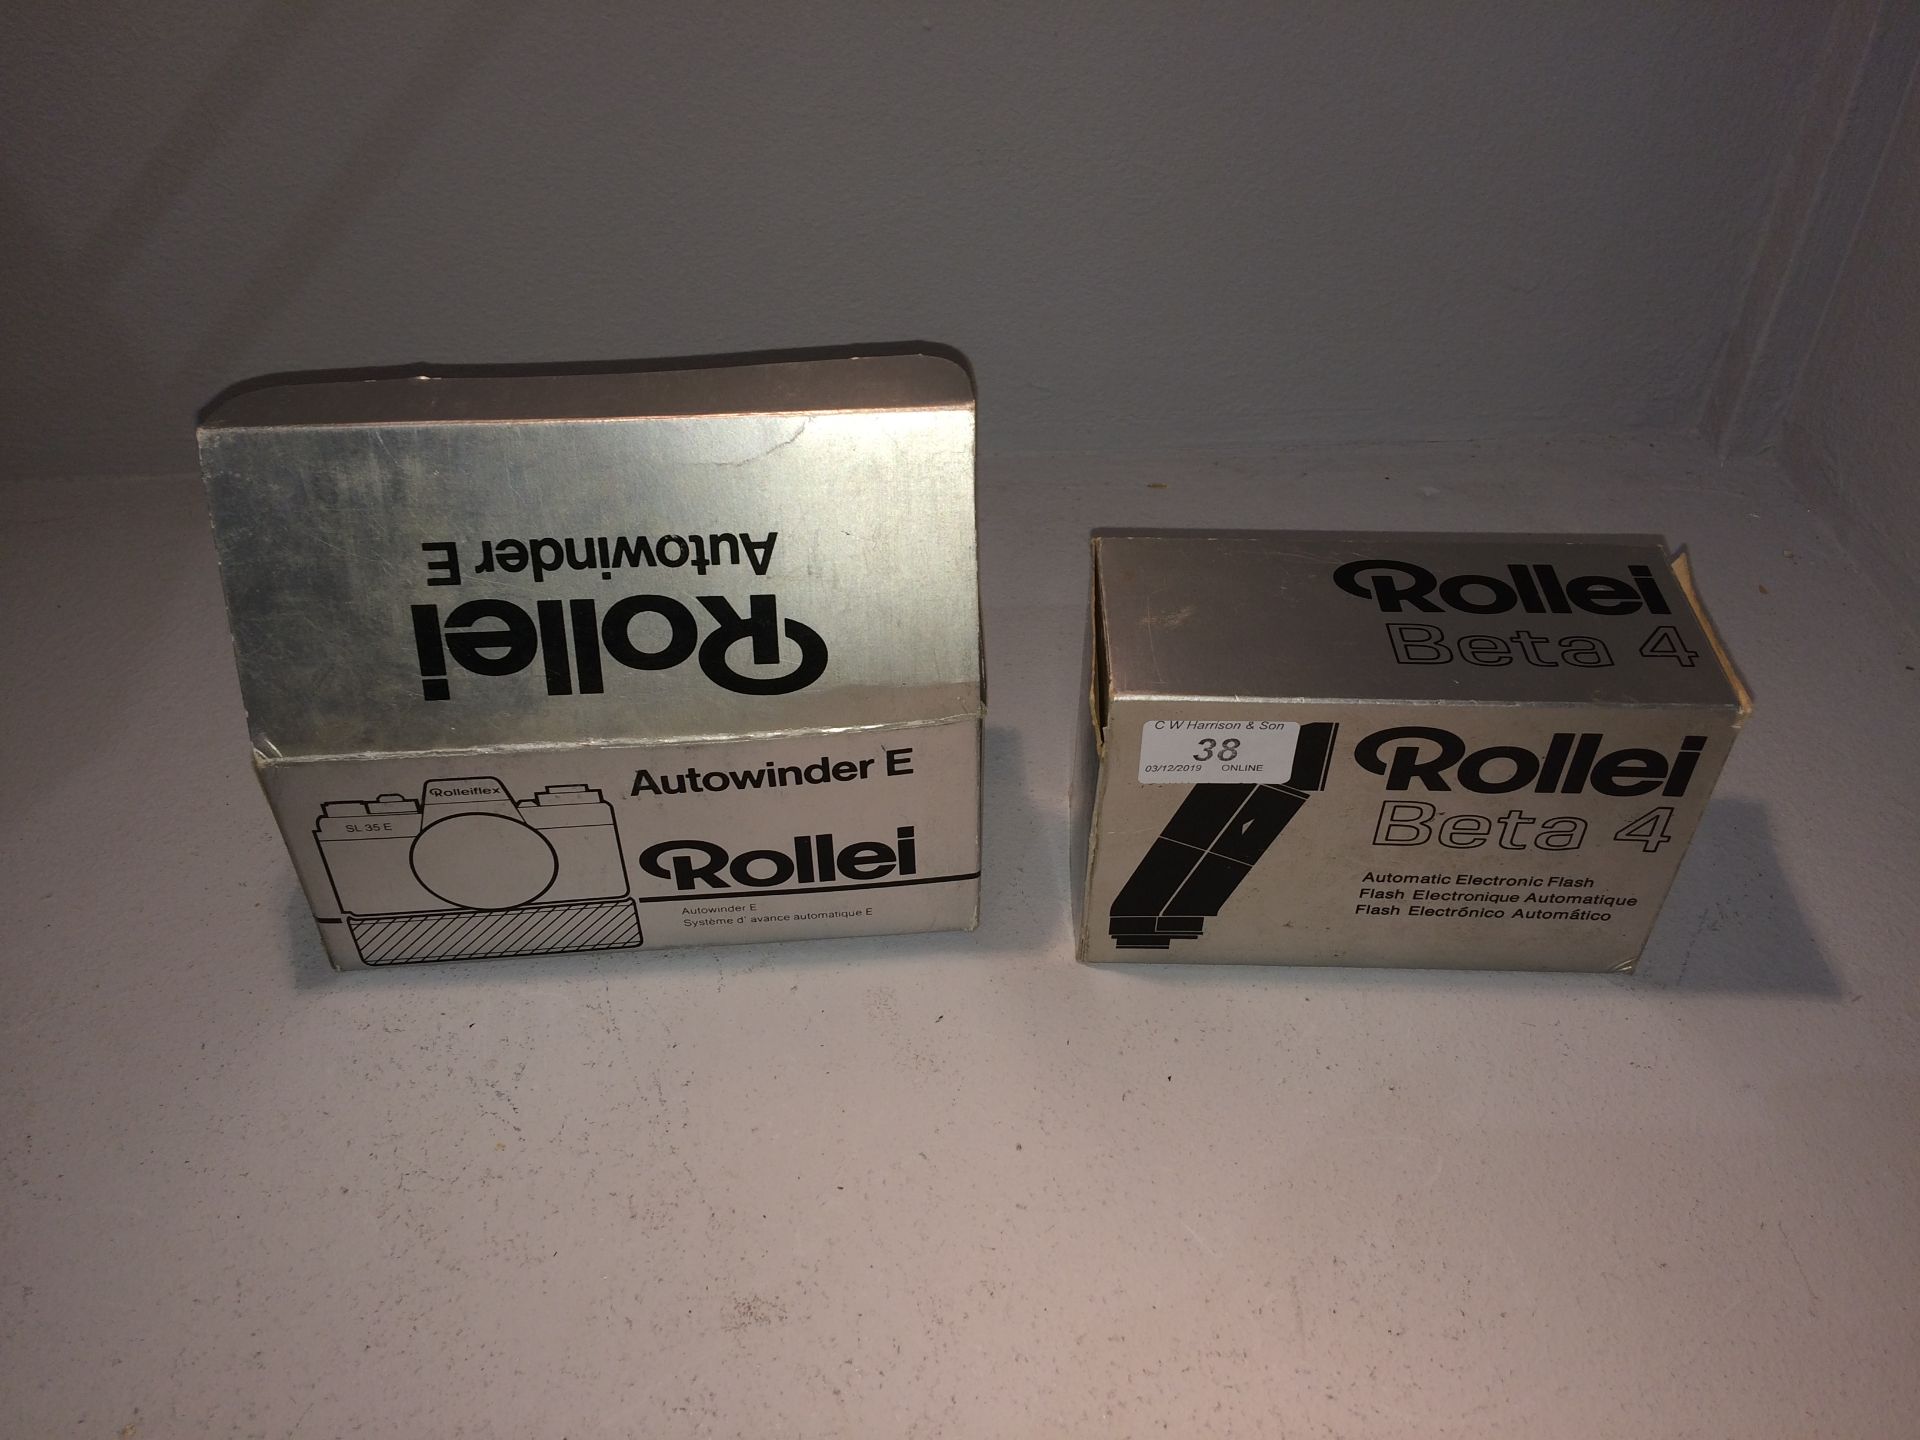 2 x items - Rollei Beta 4 automatic flash and a Rollei Autowinder E flash - both boxed